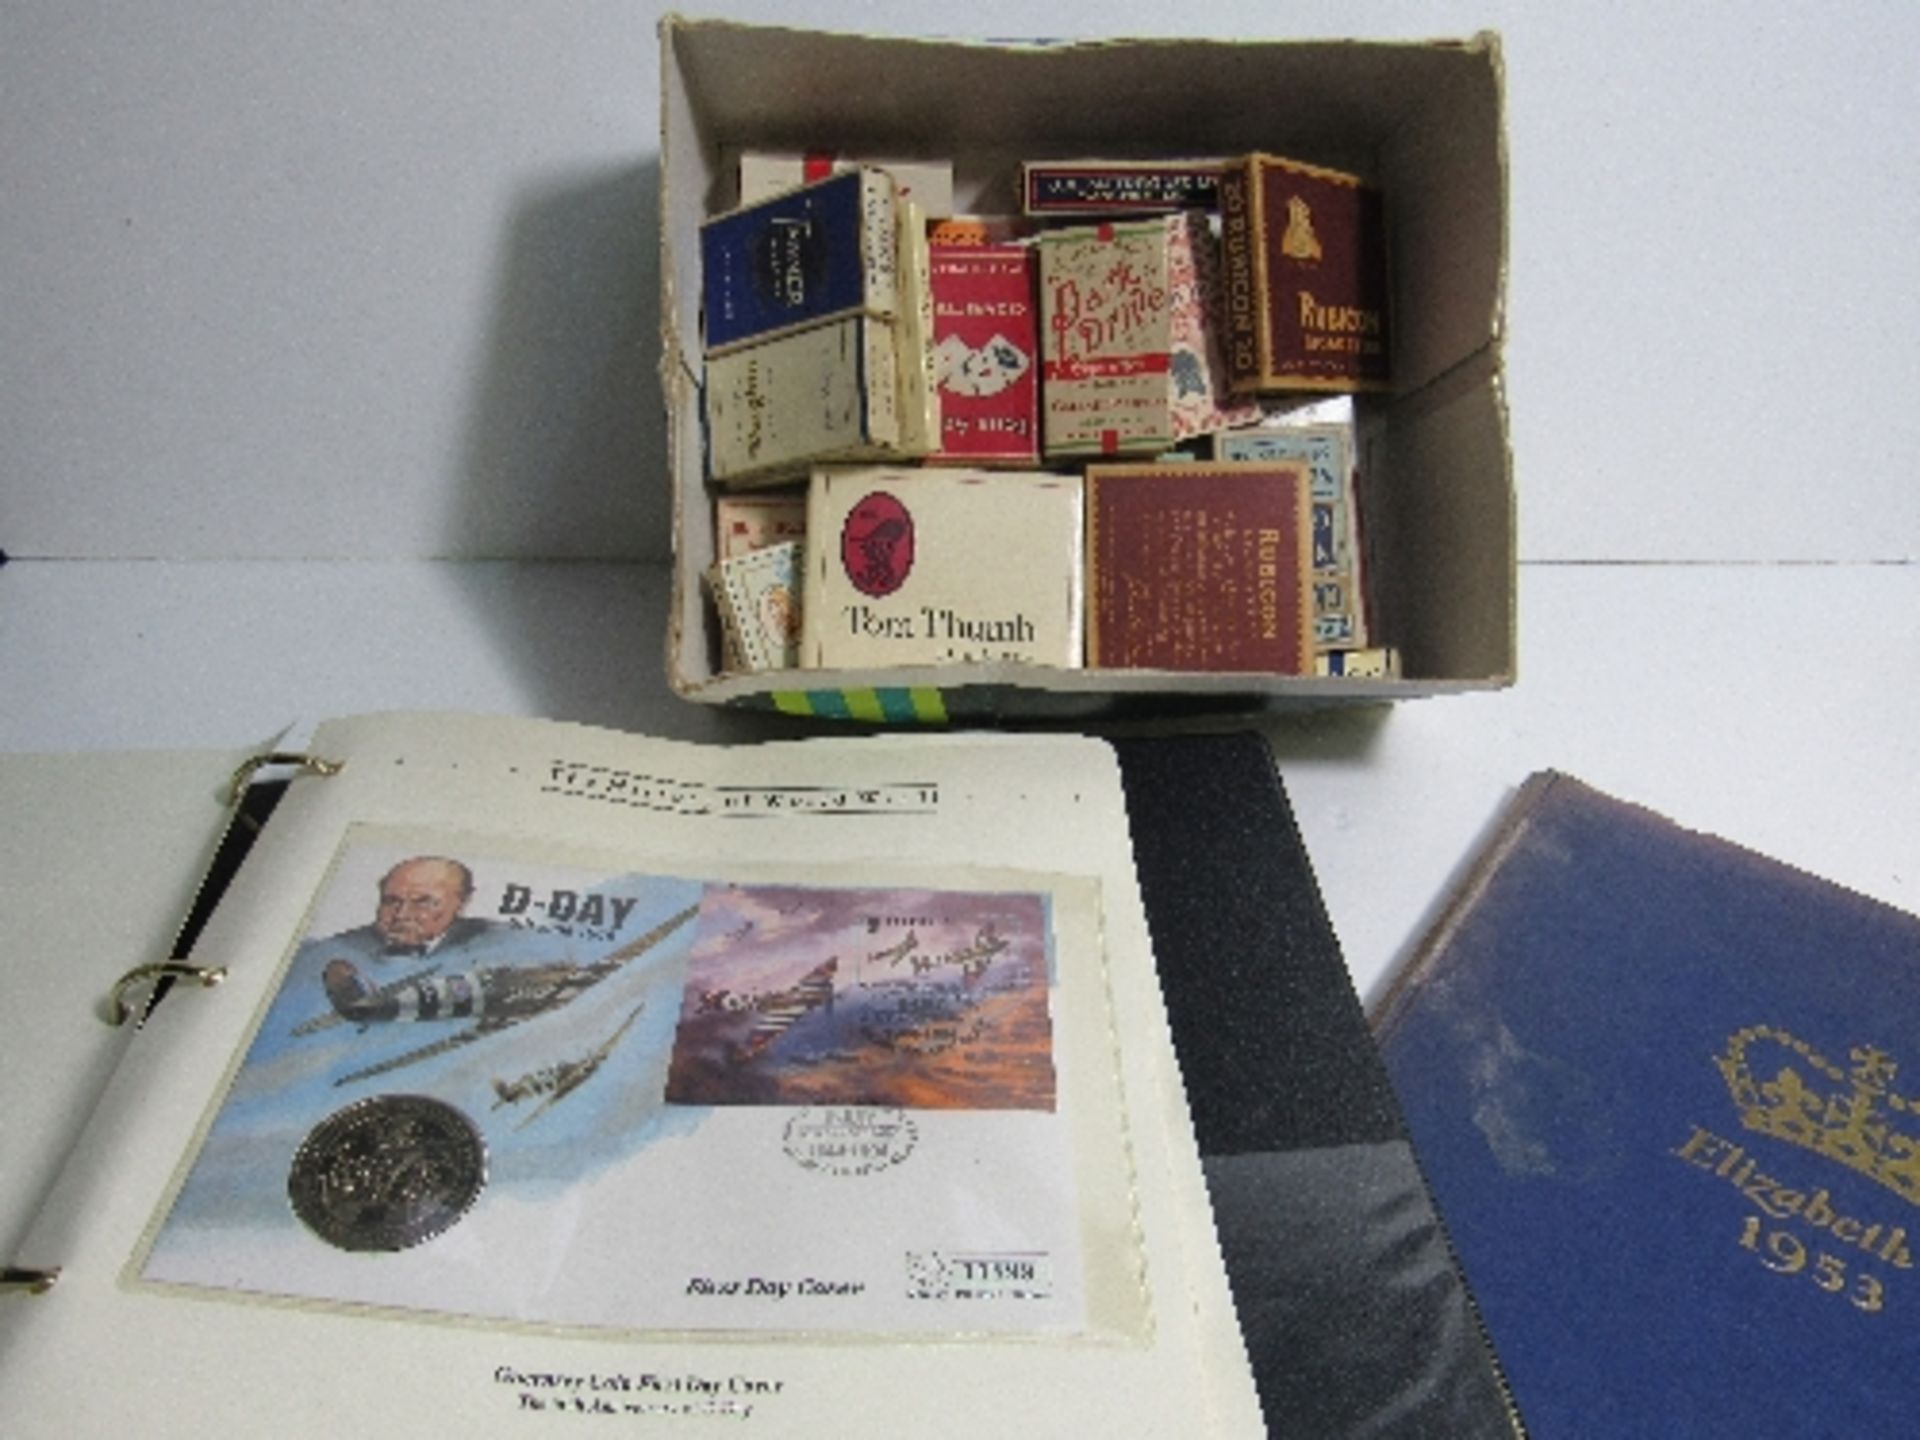 Elizabeth R, 1953 commemorative album, box containing old cigarette packets, album of First Day